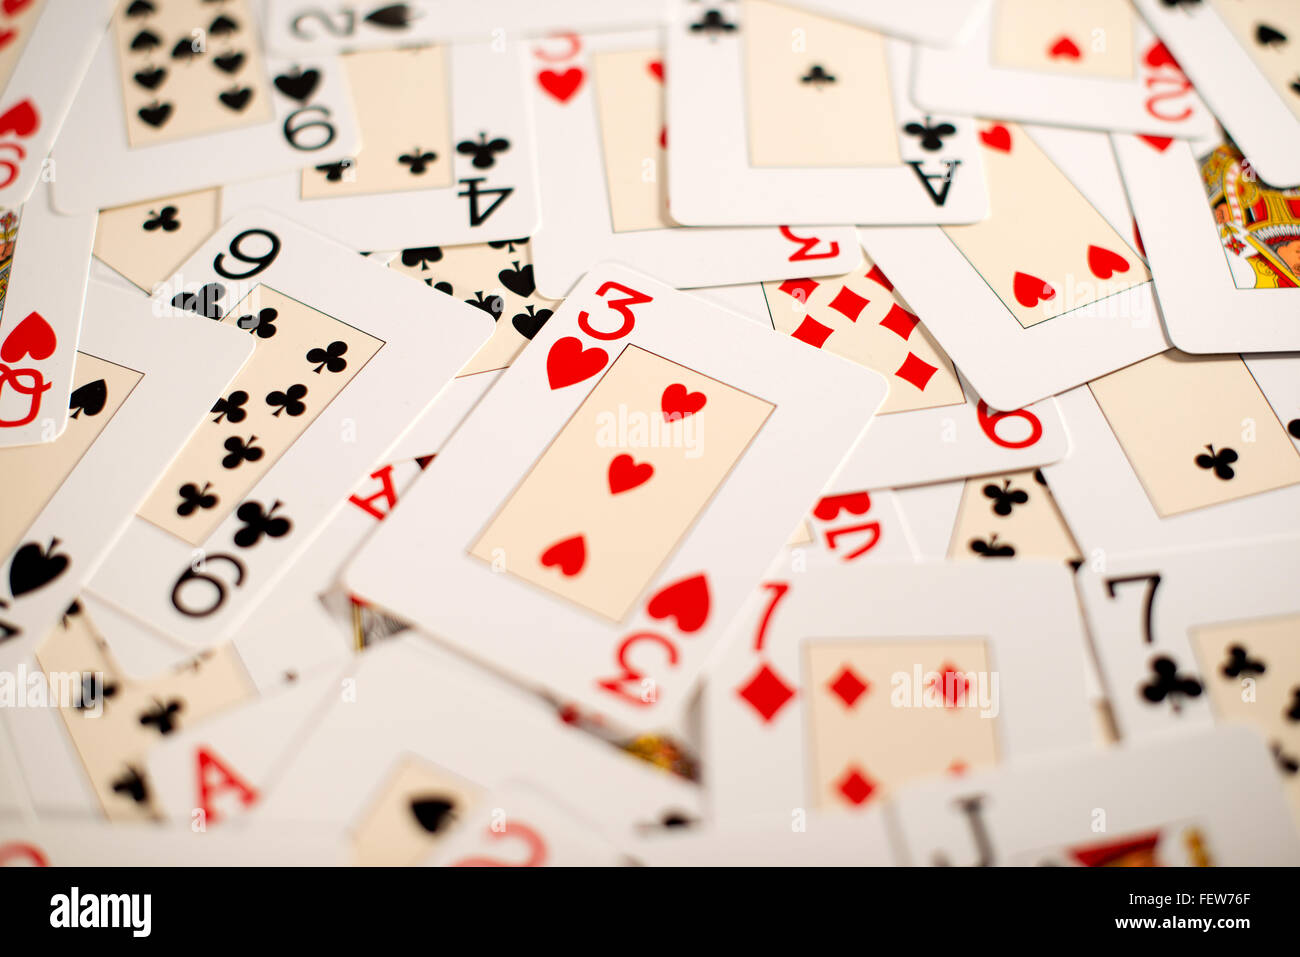 Background of a random spread of playing cards Stock Photo